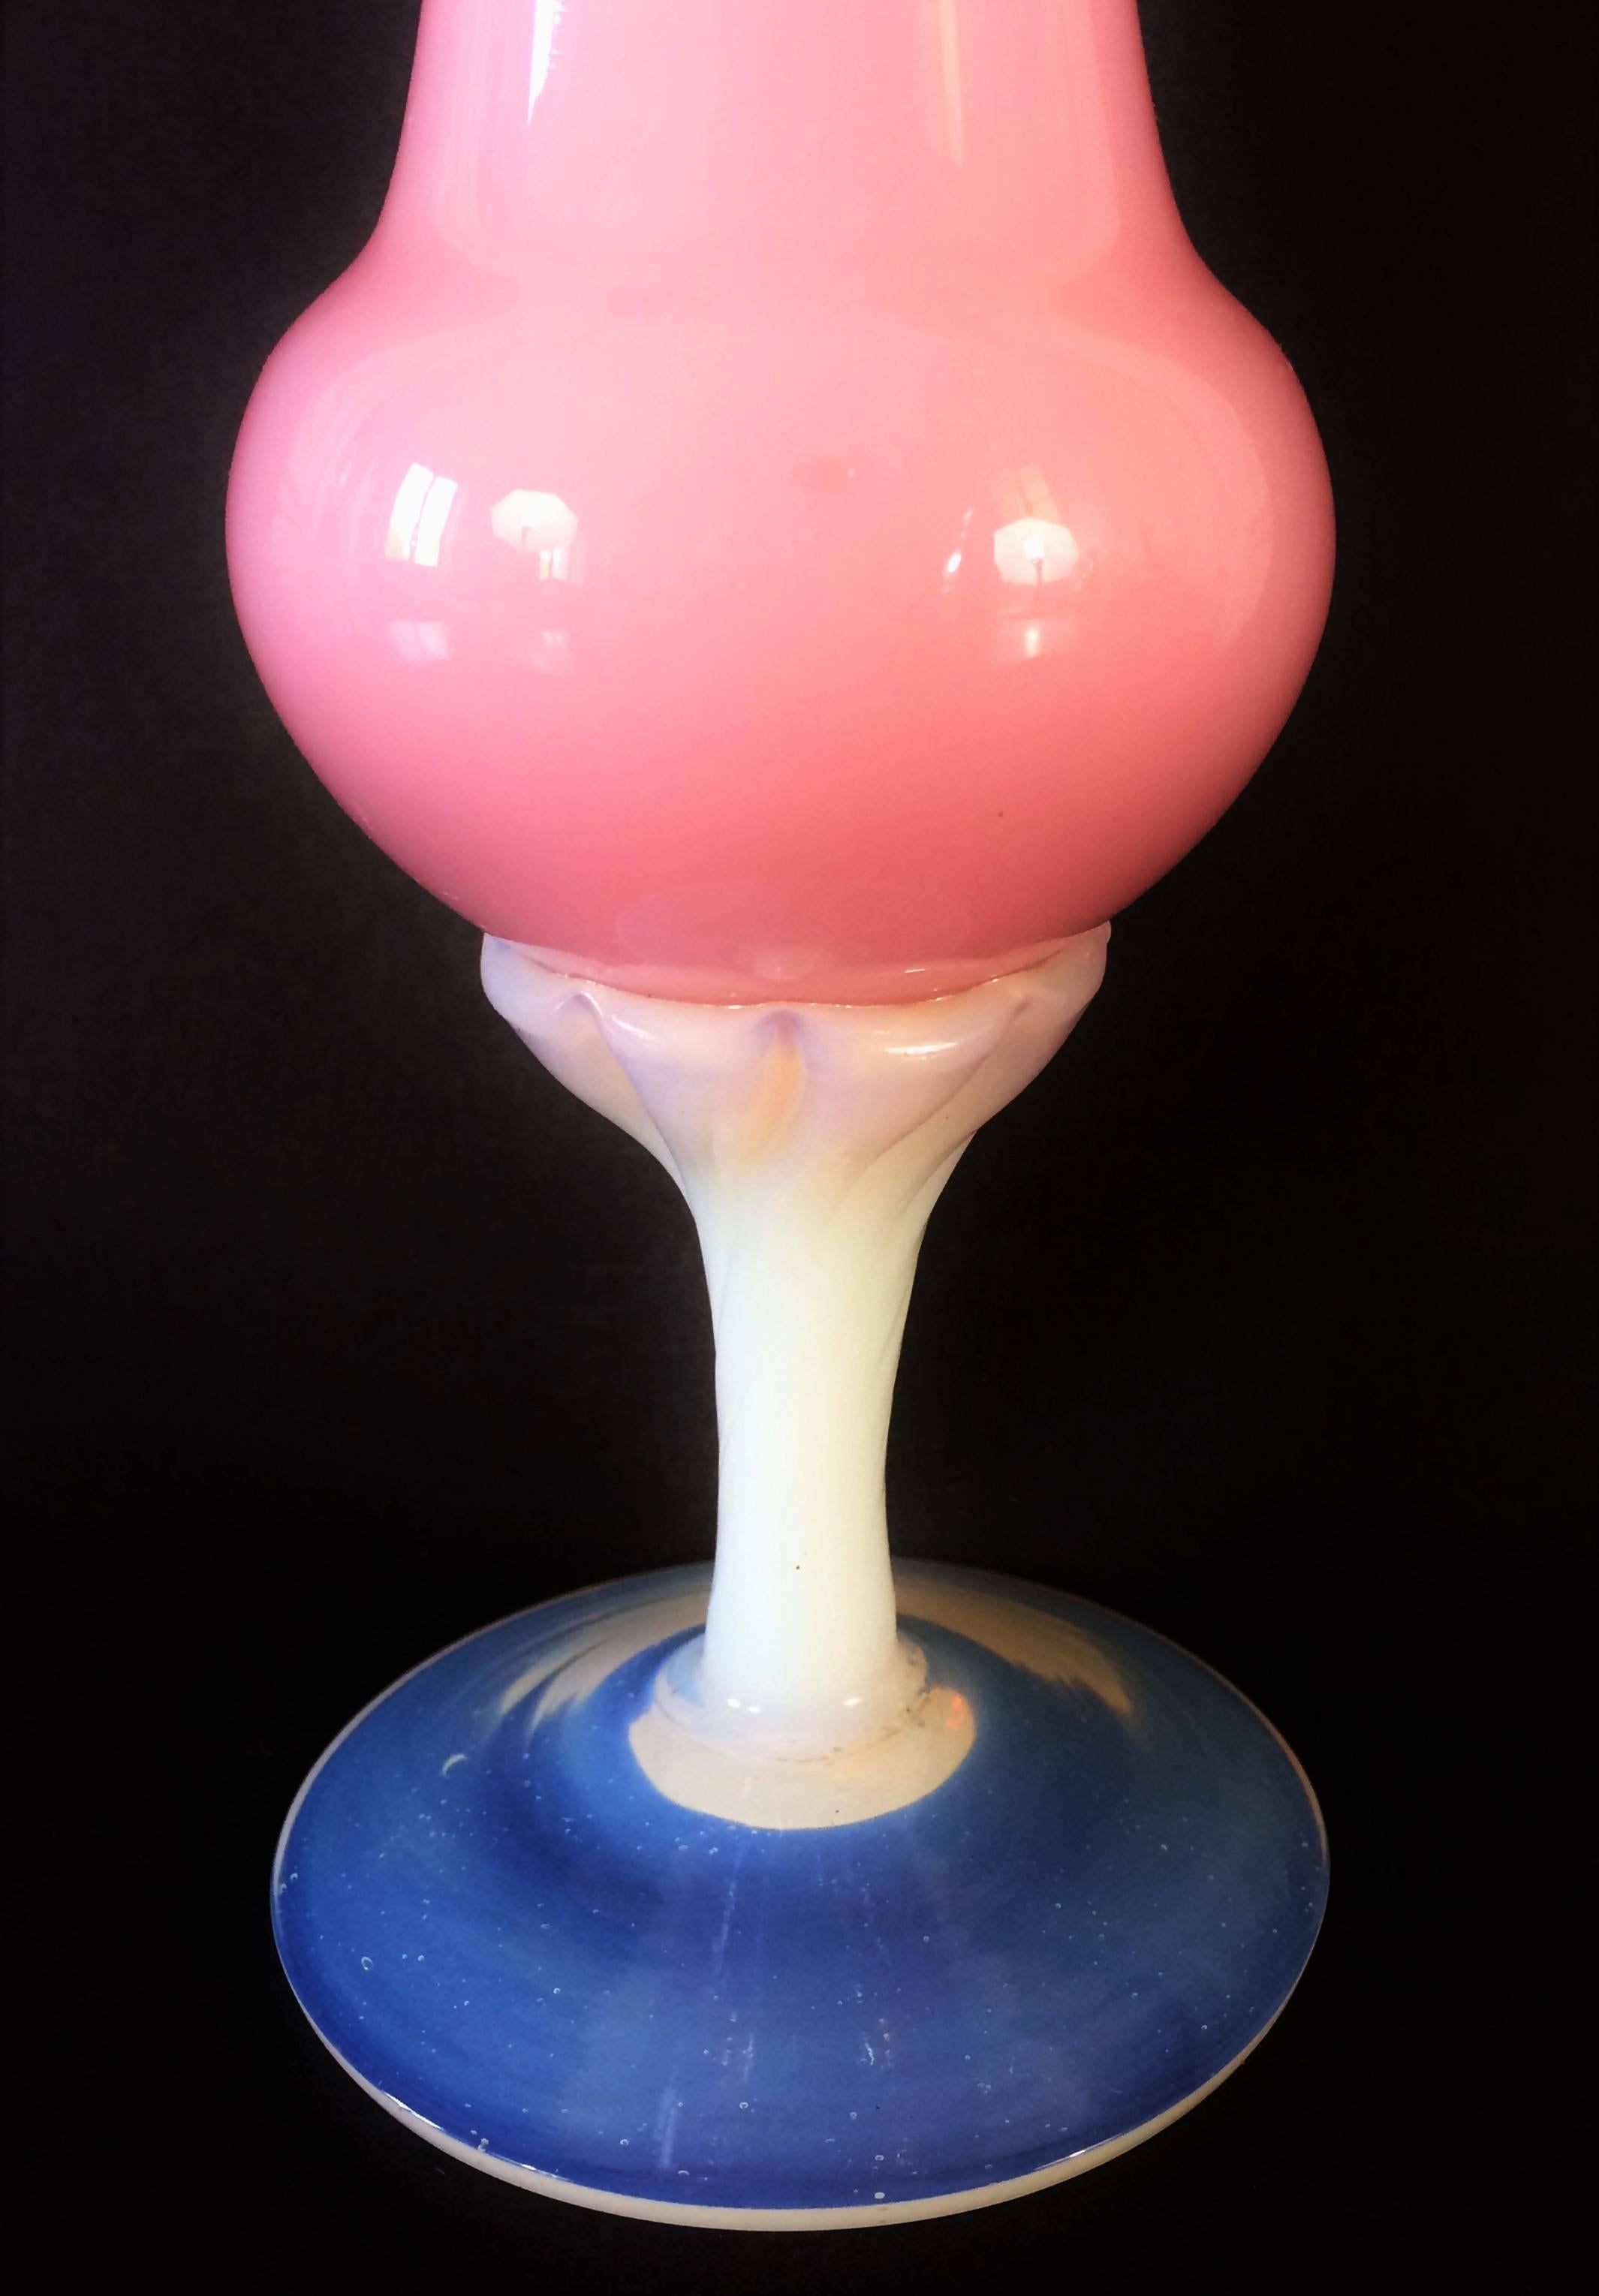 Vase on pedestal in pink opal glass.
Blue feet.
France early 20th century. Art Deco period.
Very nice french work.

Opaline or opaline glass is a type of white or colored, opaque or translucent glass that can be blown or pressed into a wide variety